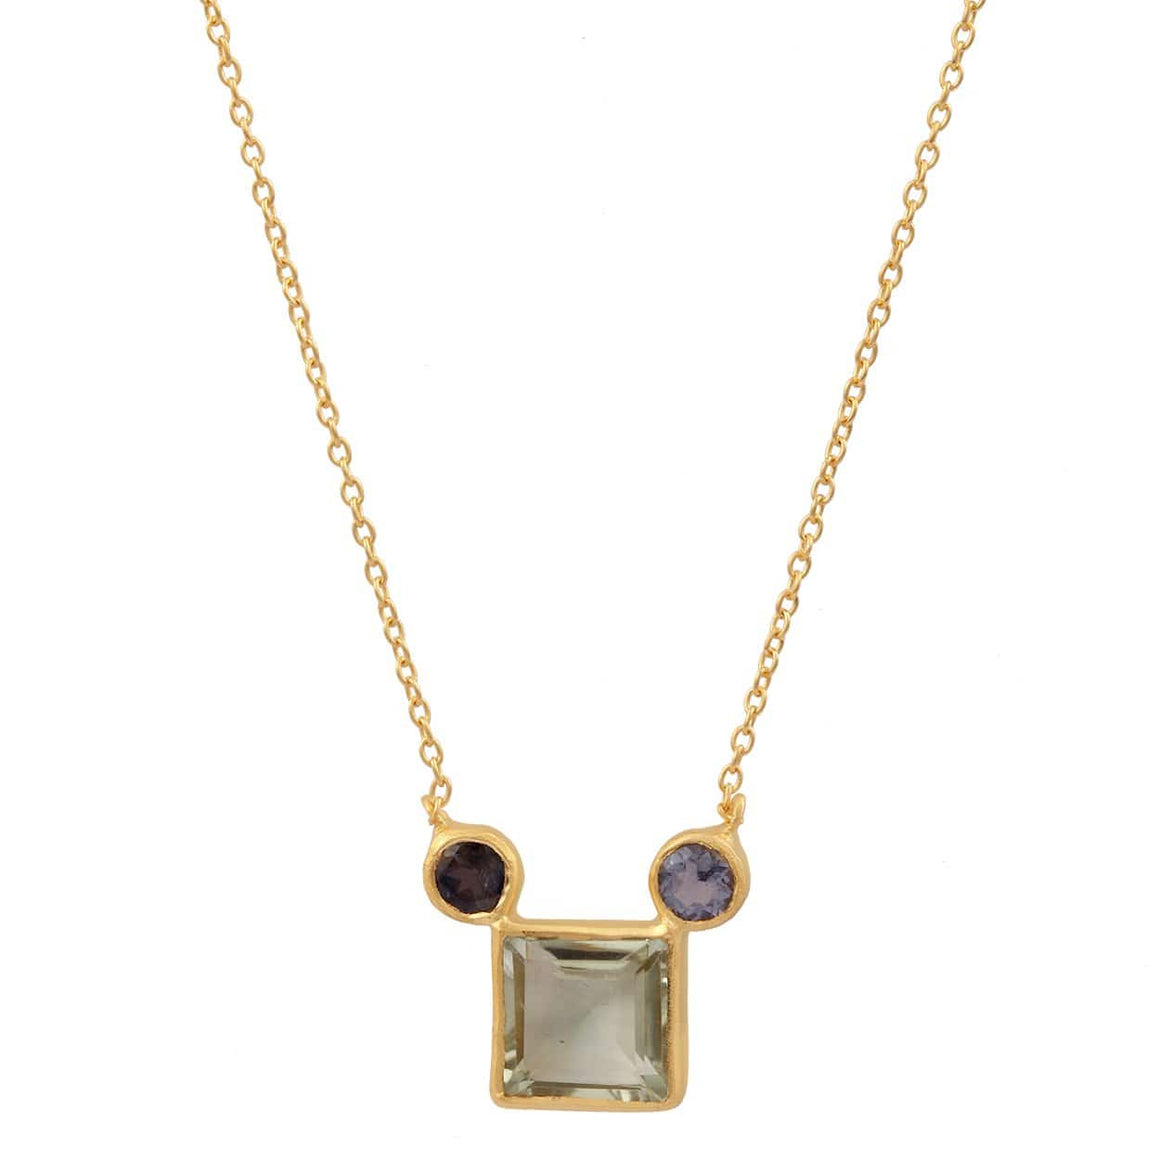 Manjusha Jewels Necklaces Natalia Rain Dot Necklace in Green Amethyst and Iolite